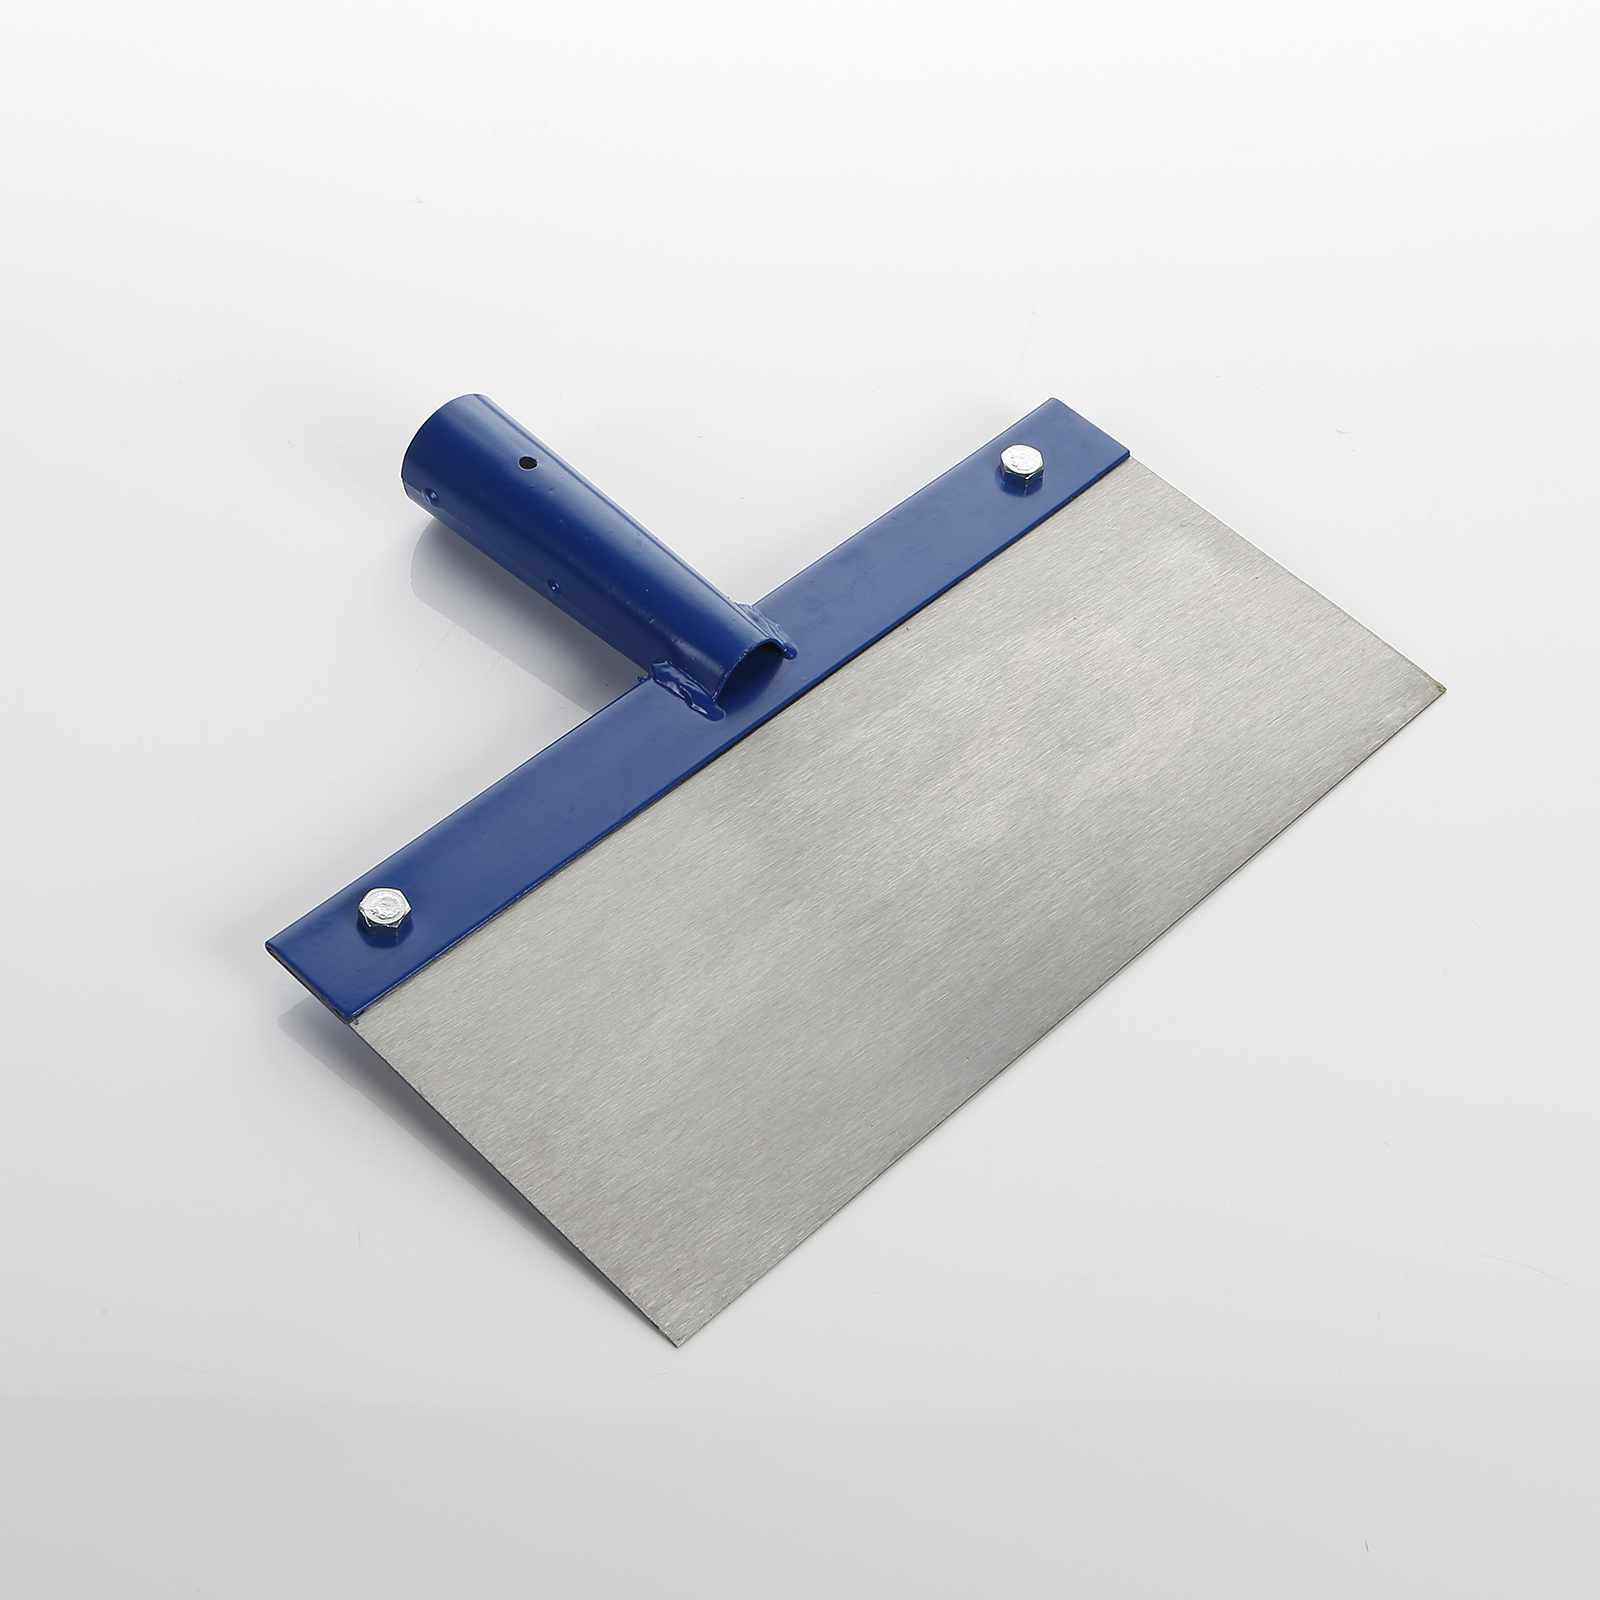 Reinforced Metal Floor Scraper For Working With Building Materials ALYCO, Products